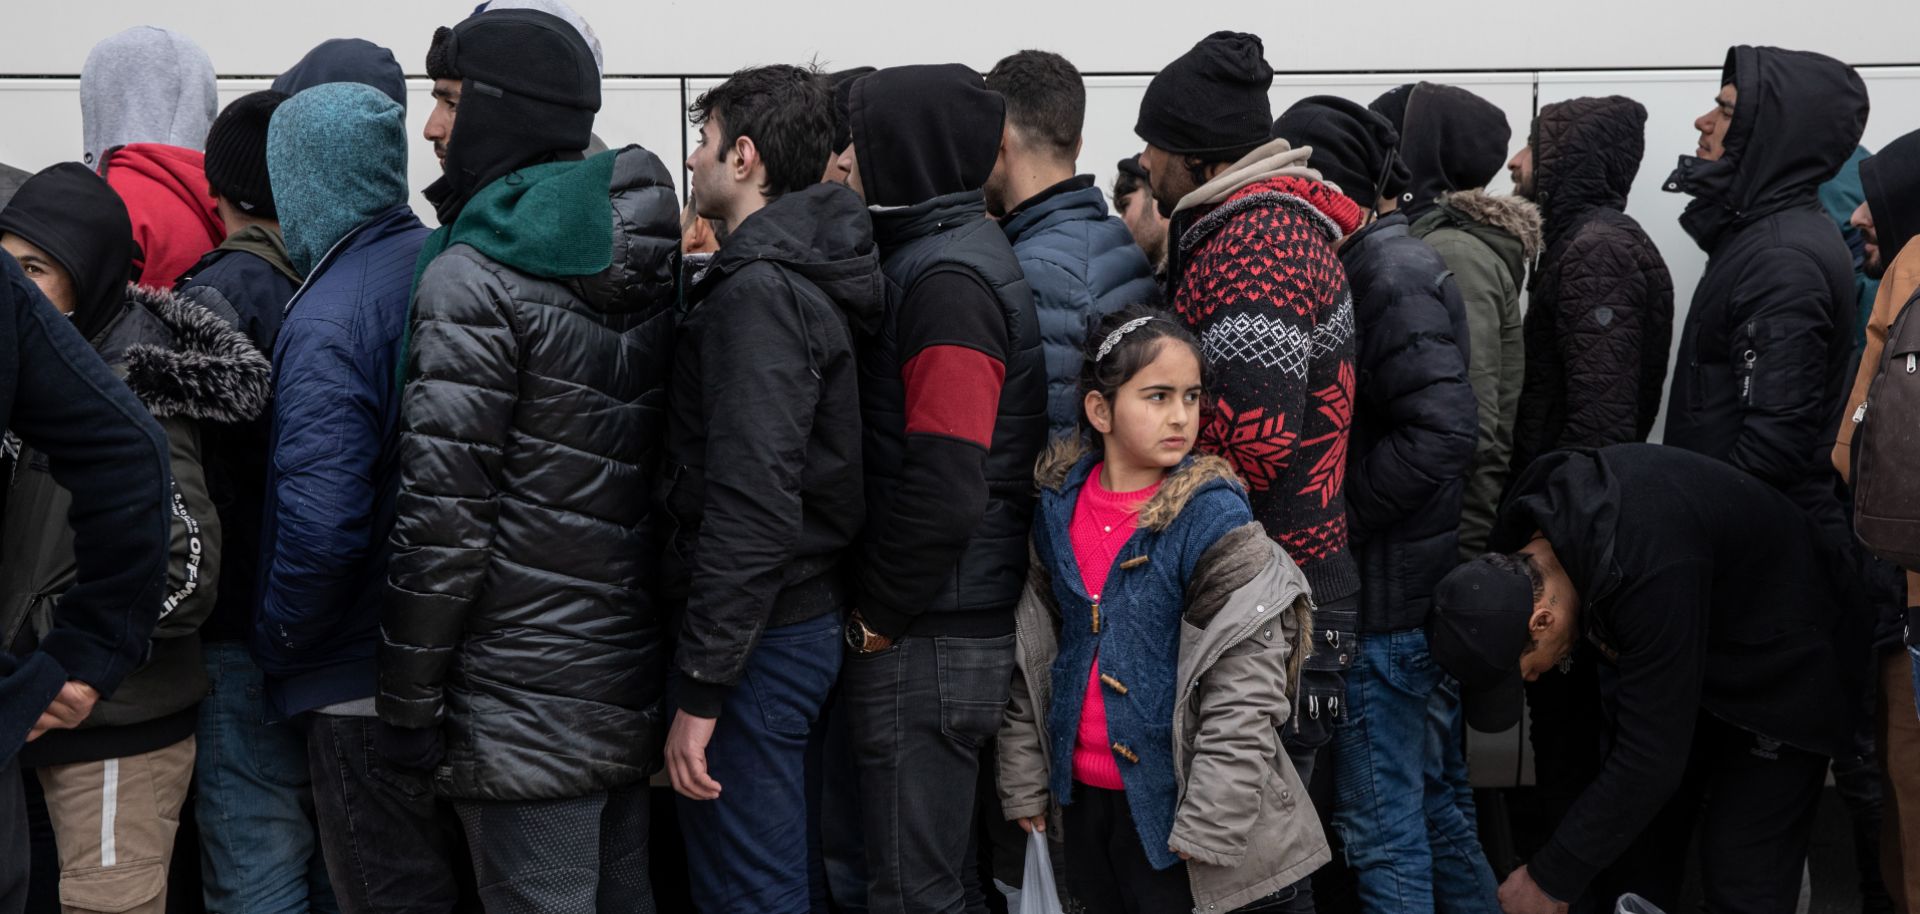 A photo of refugees and migrants waiting in line to receive blankets and food near the Greek border in Edirne, Turkey, on March 5, 2020.